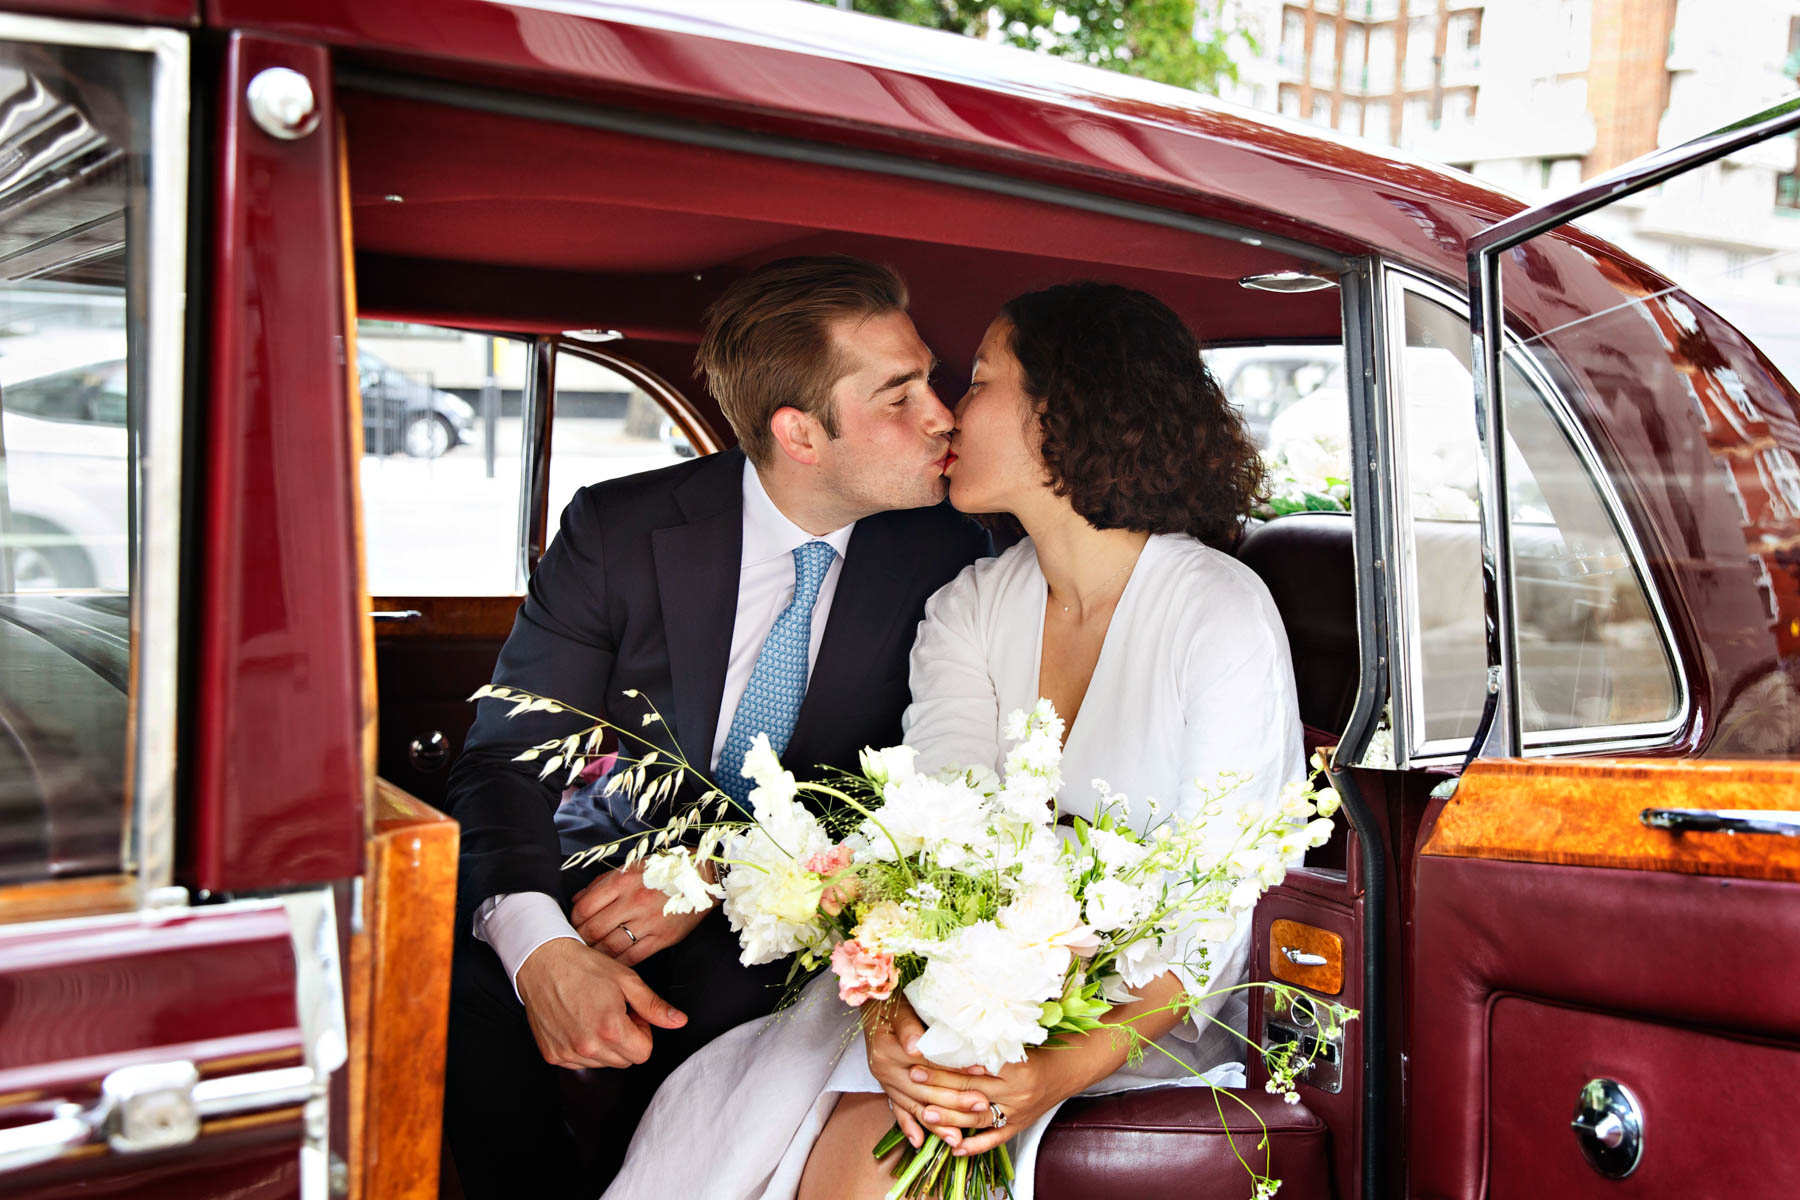 A bride and groom kiss in the back of a maroon vintage Rolls Royce, after their intimate wedding ceremony in the Marylebone Room.